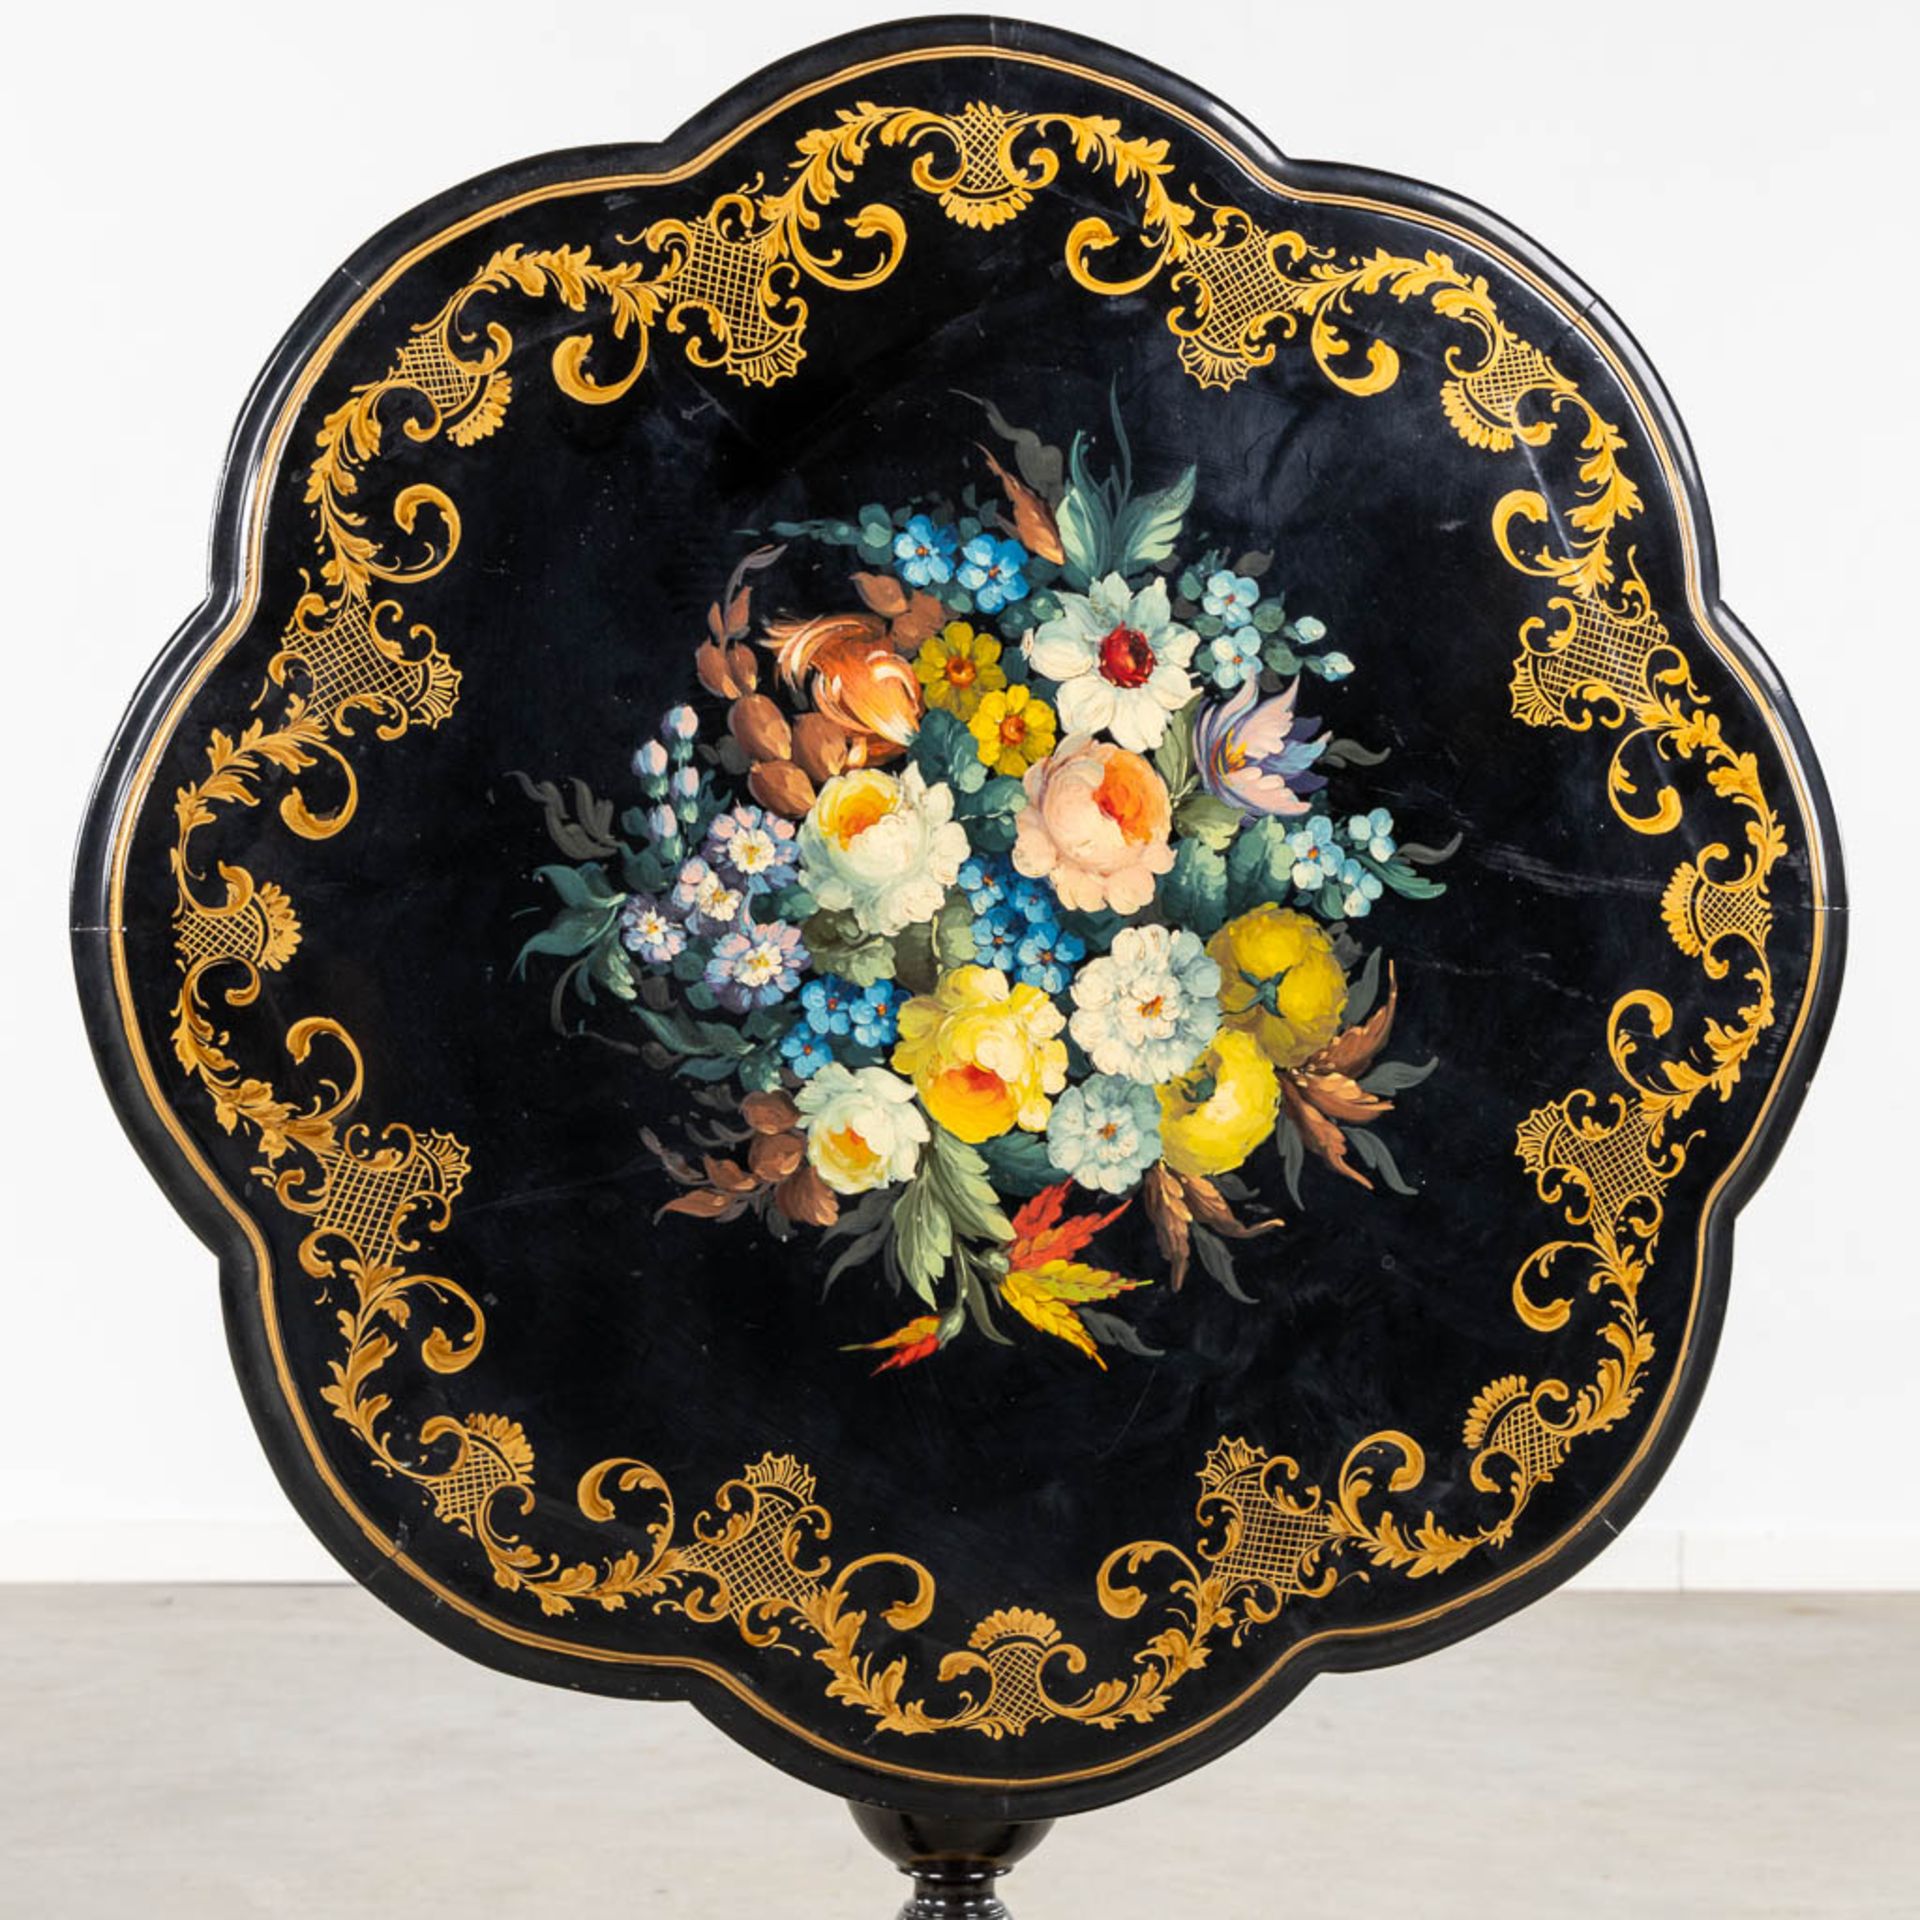 A Tilt-Top table with hand-painted floral decor, Napoleon 3 style. (H:67 x D:72 cm) - Image 7 of 9